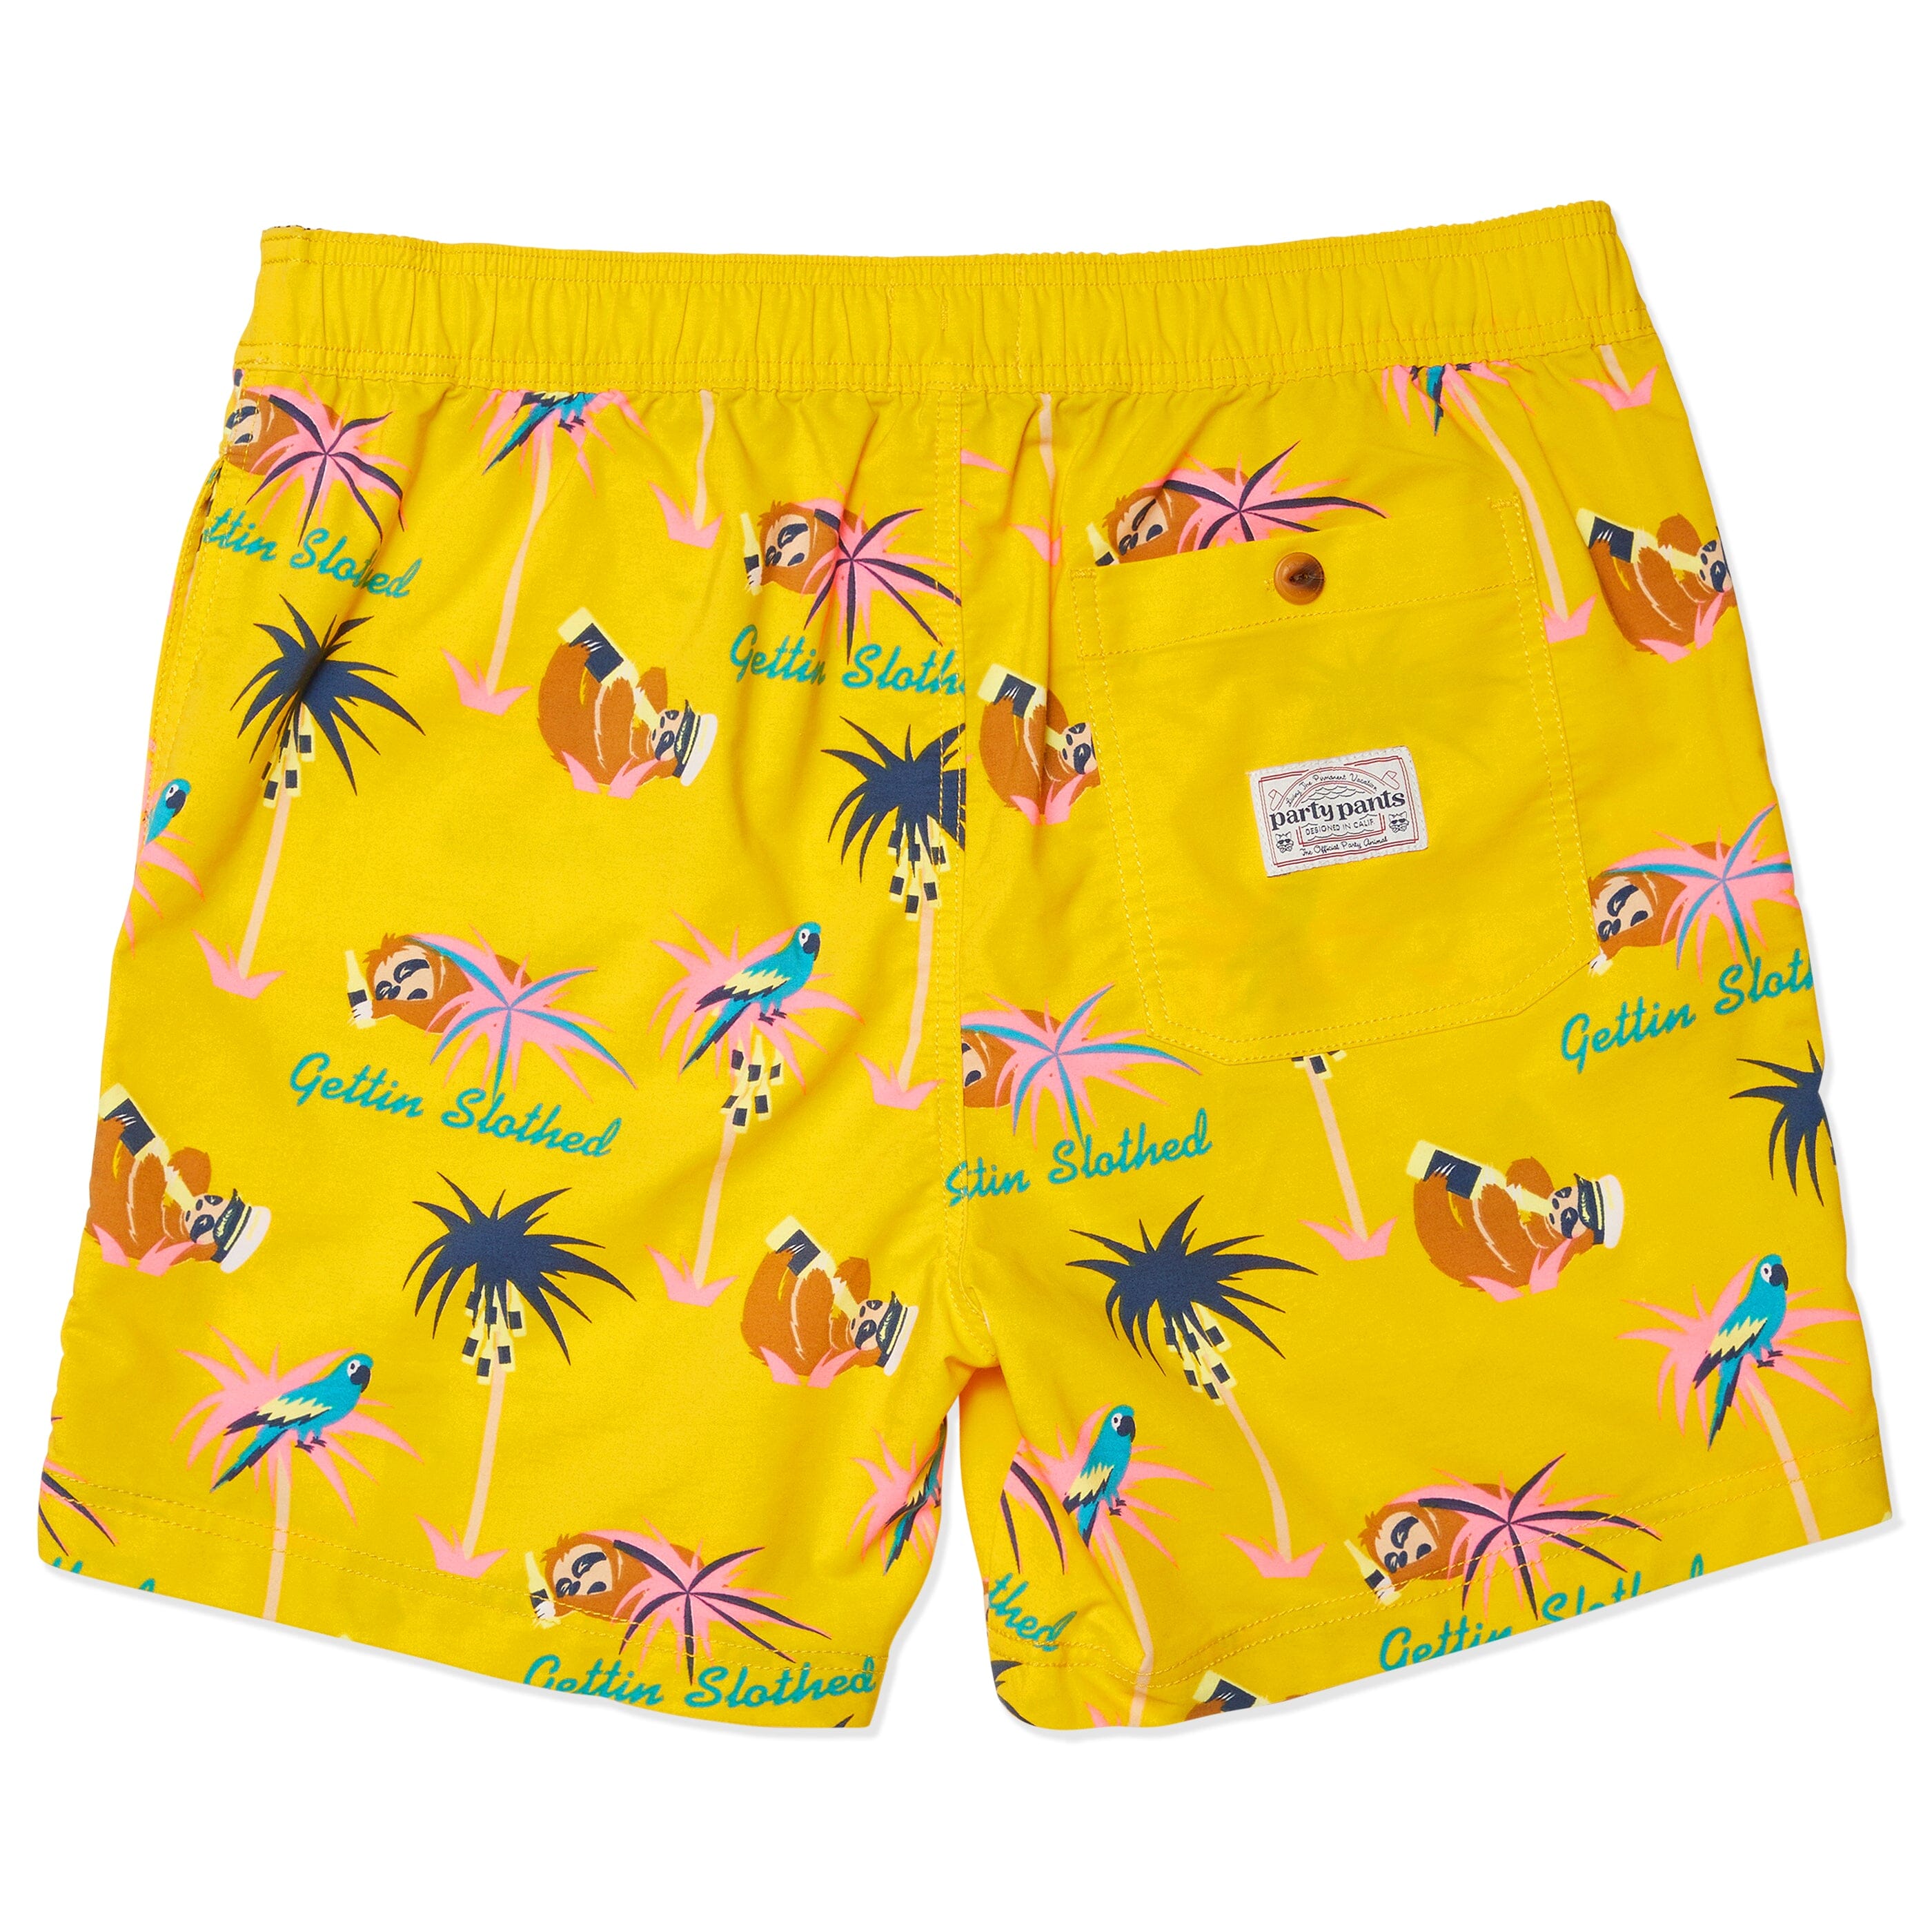 GETTIN' SLOTHED PARTY STARTER SHORT - YELLOW PRINTED SHORTS PARTY PANTS 